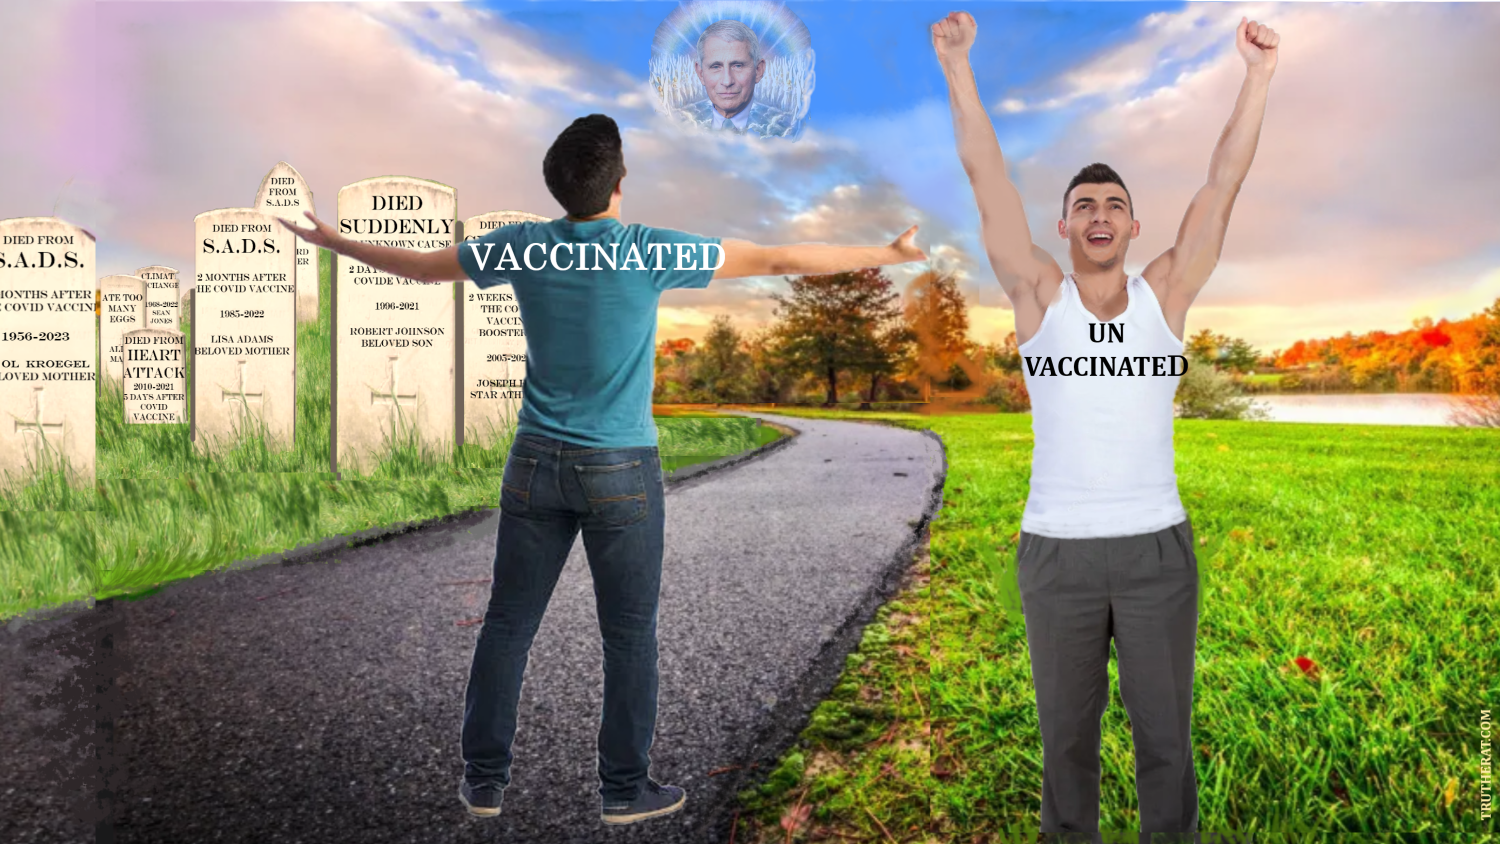 UNVACCINATED MEN REJOICING AND HAVE THEIR SPERM SOUGHT OUT